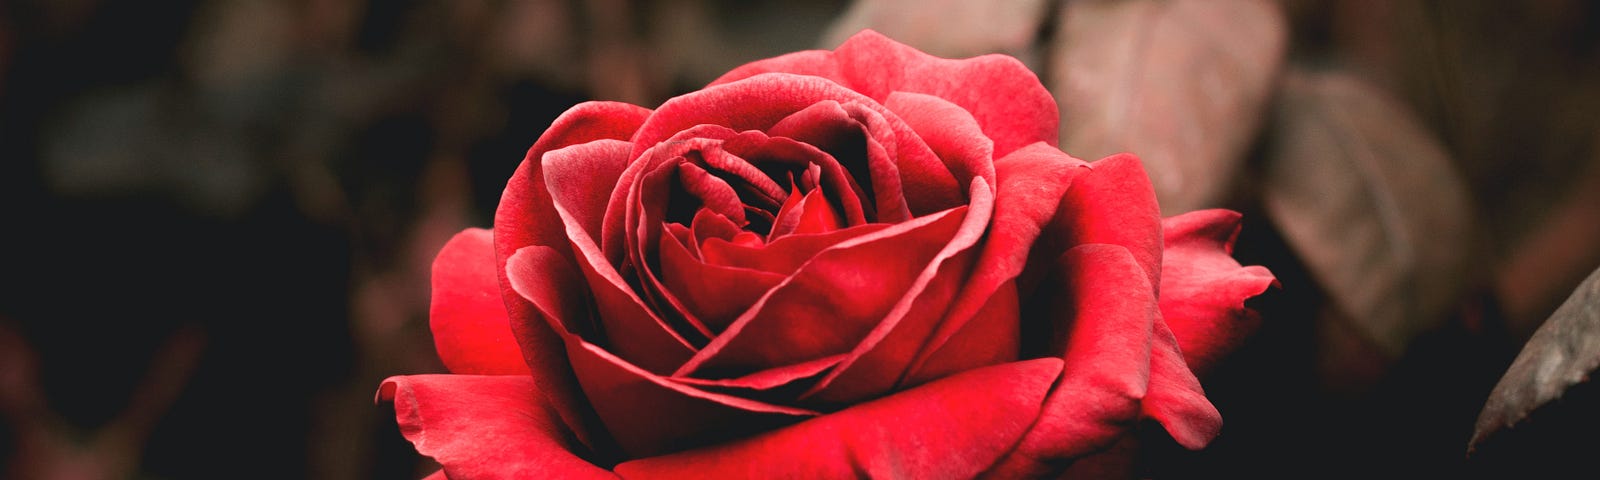 An image of a red rose in bloom.